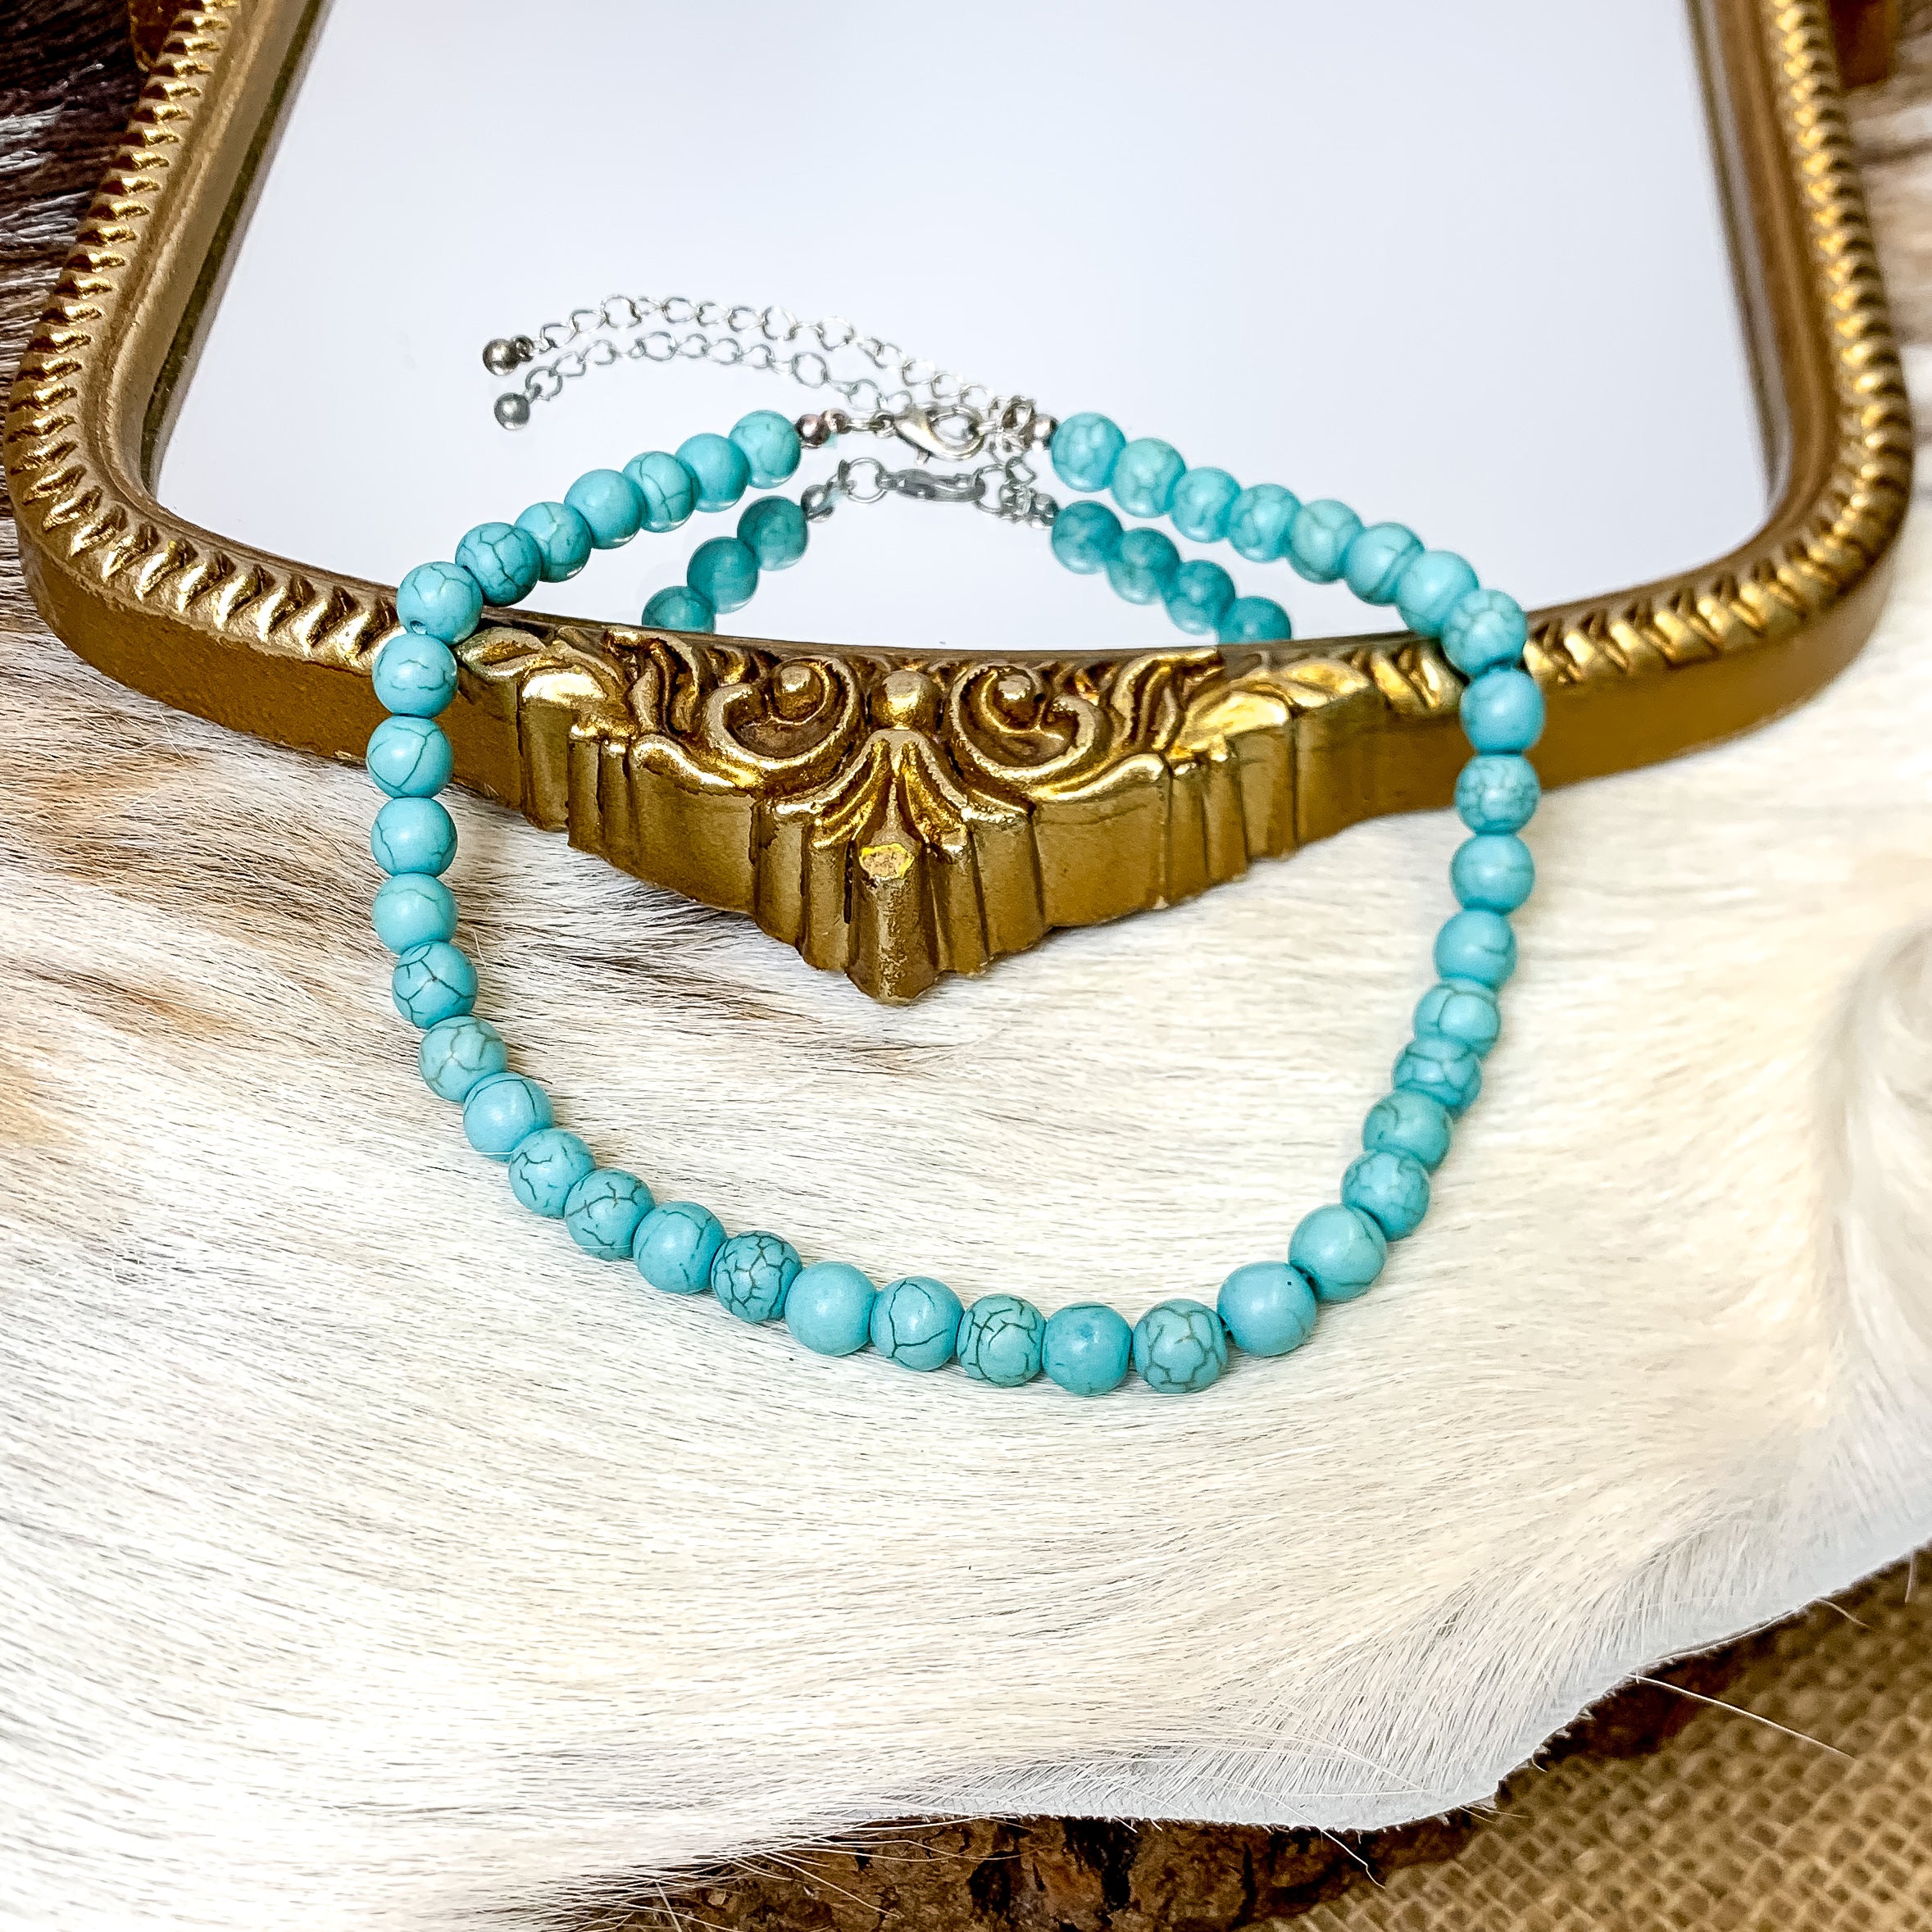 Beaded Choker Necklace In Turquoise Blue